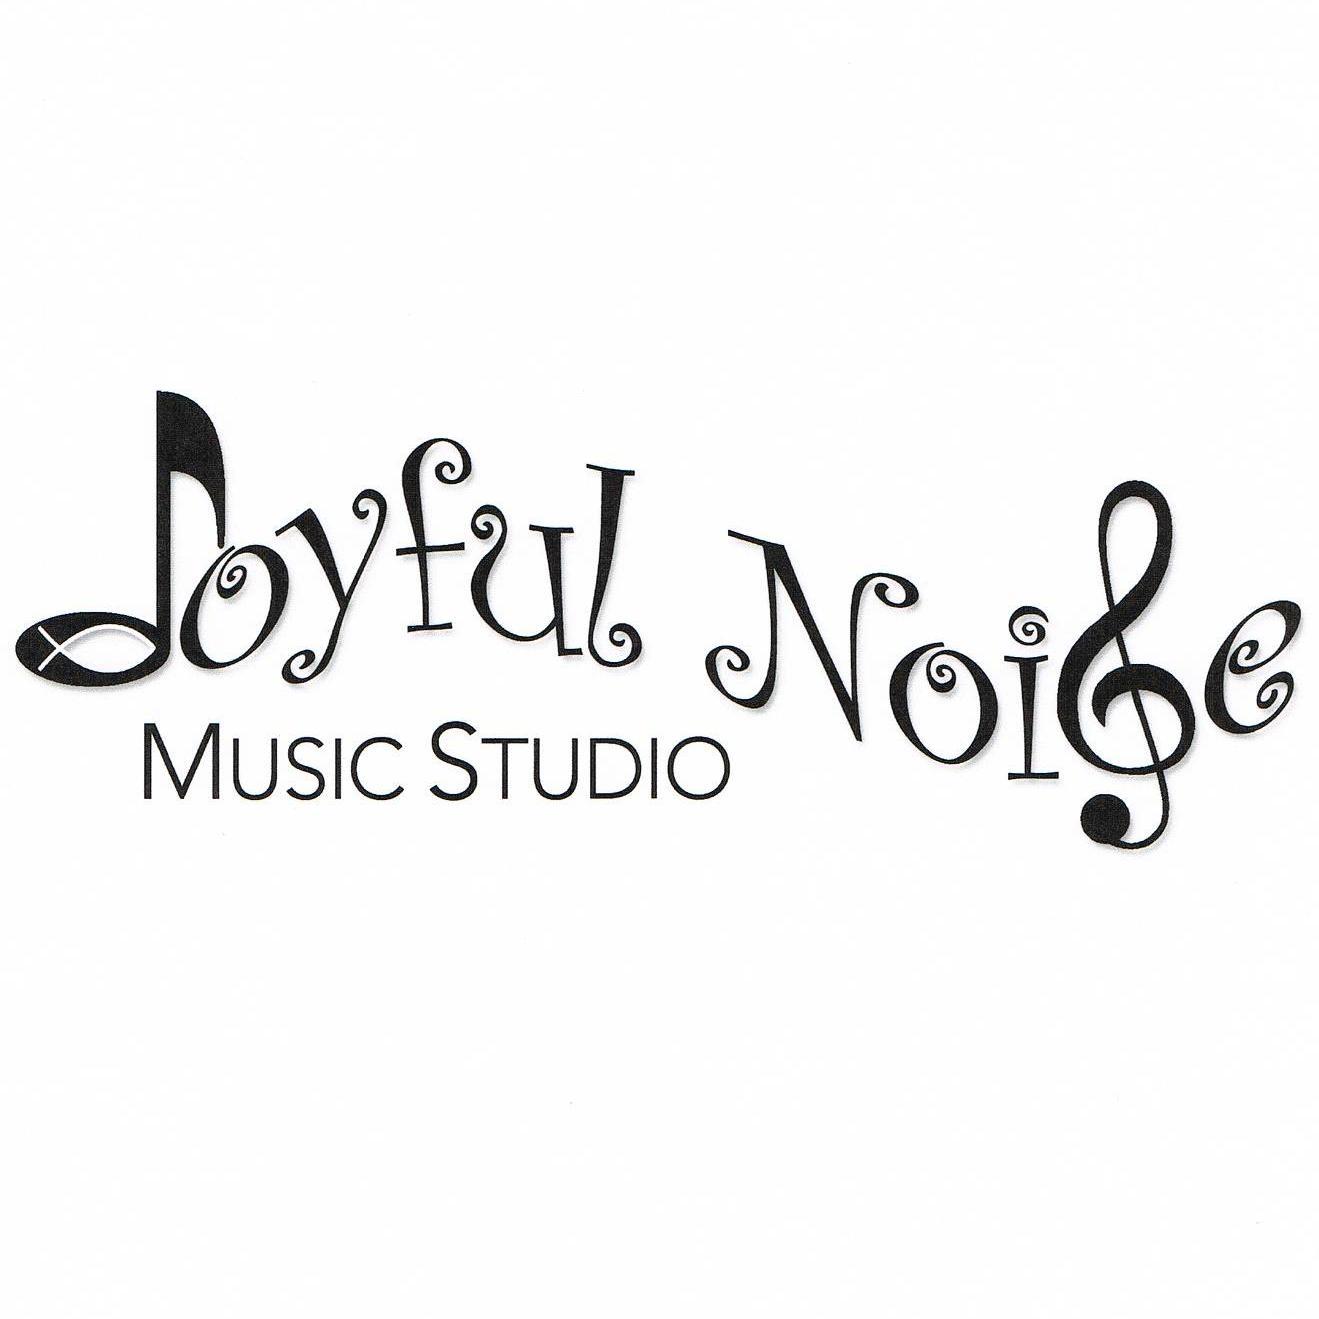 Joyful Noise Music Studio offers music education for your youngsters including piano lessons, and music and movement classes.